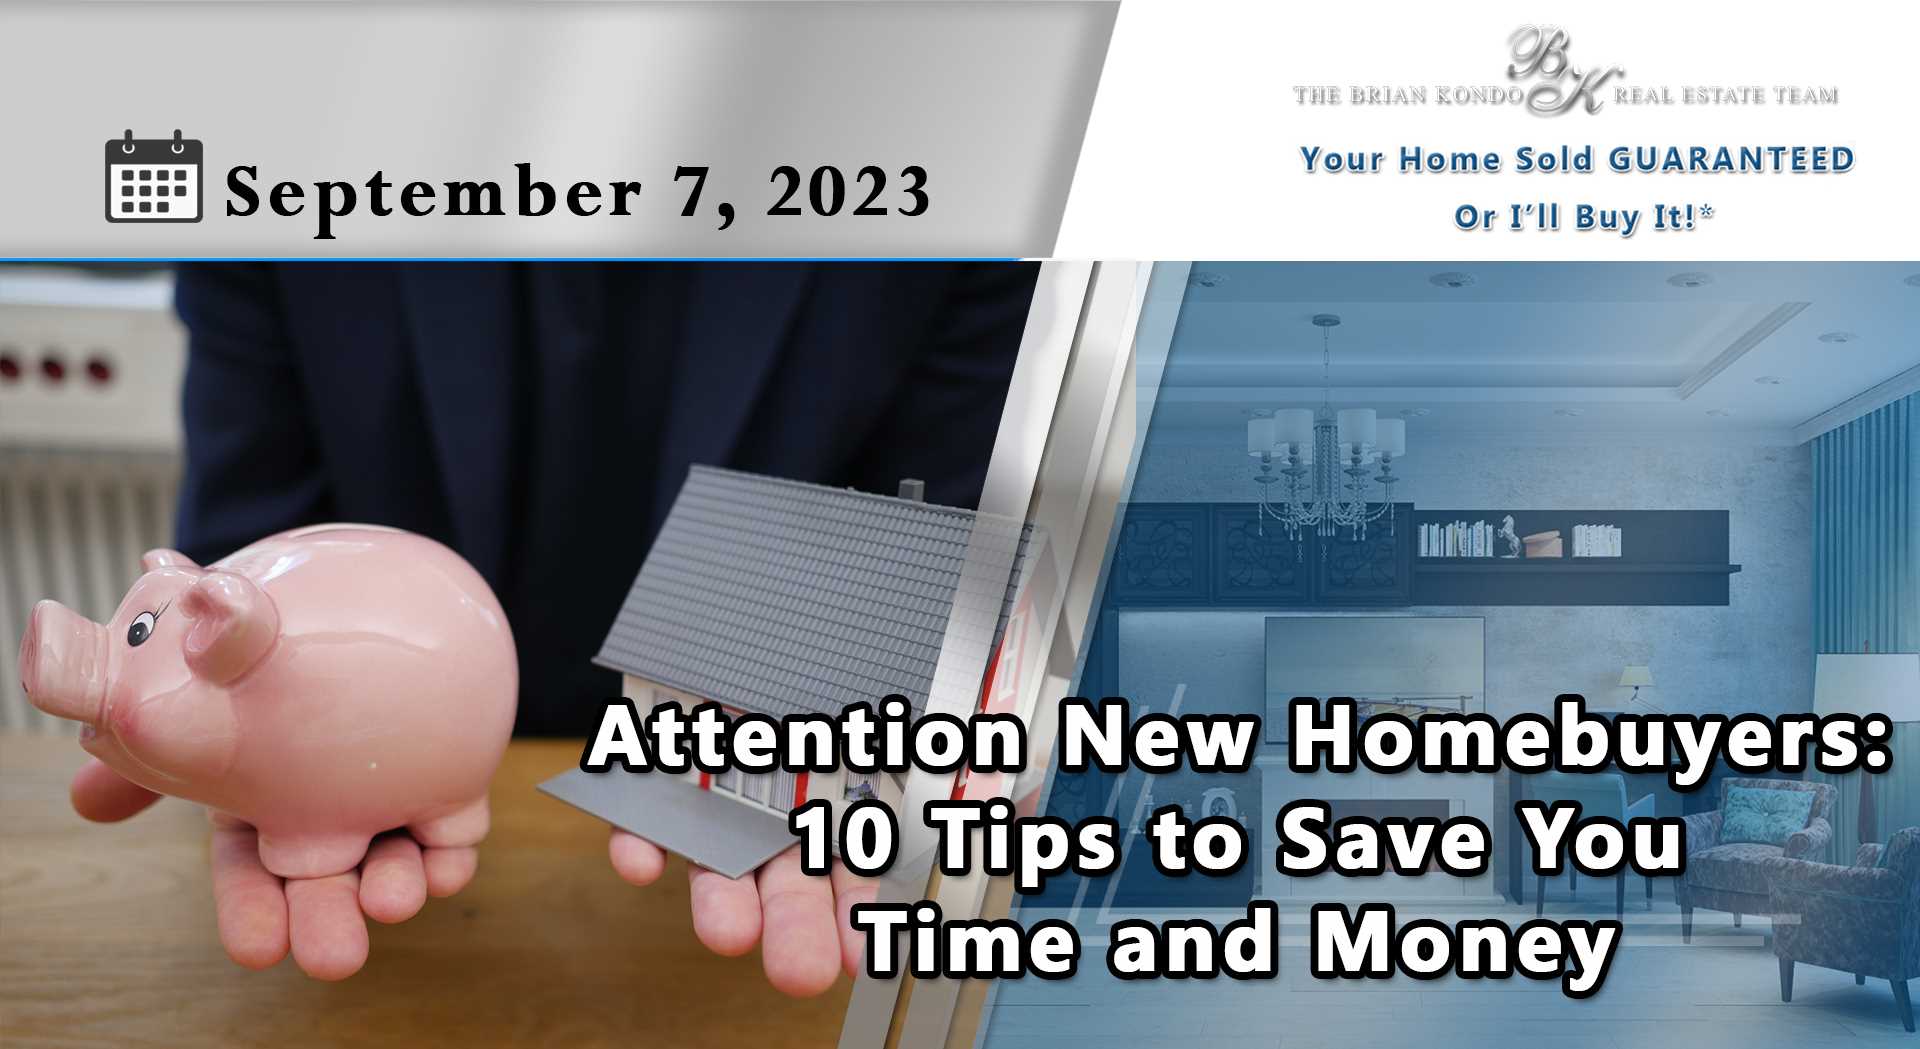 Attention New Homebuyers: 10 Tips to Save You Time and Money